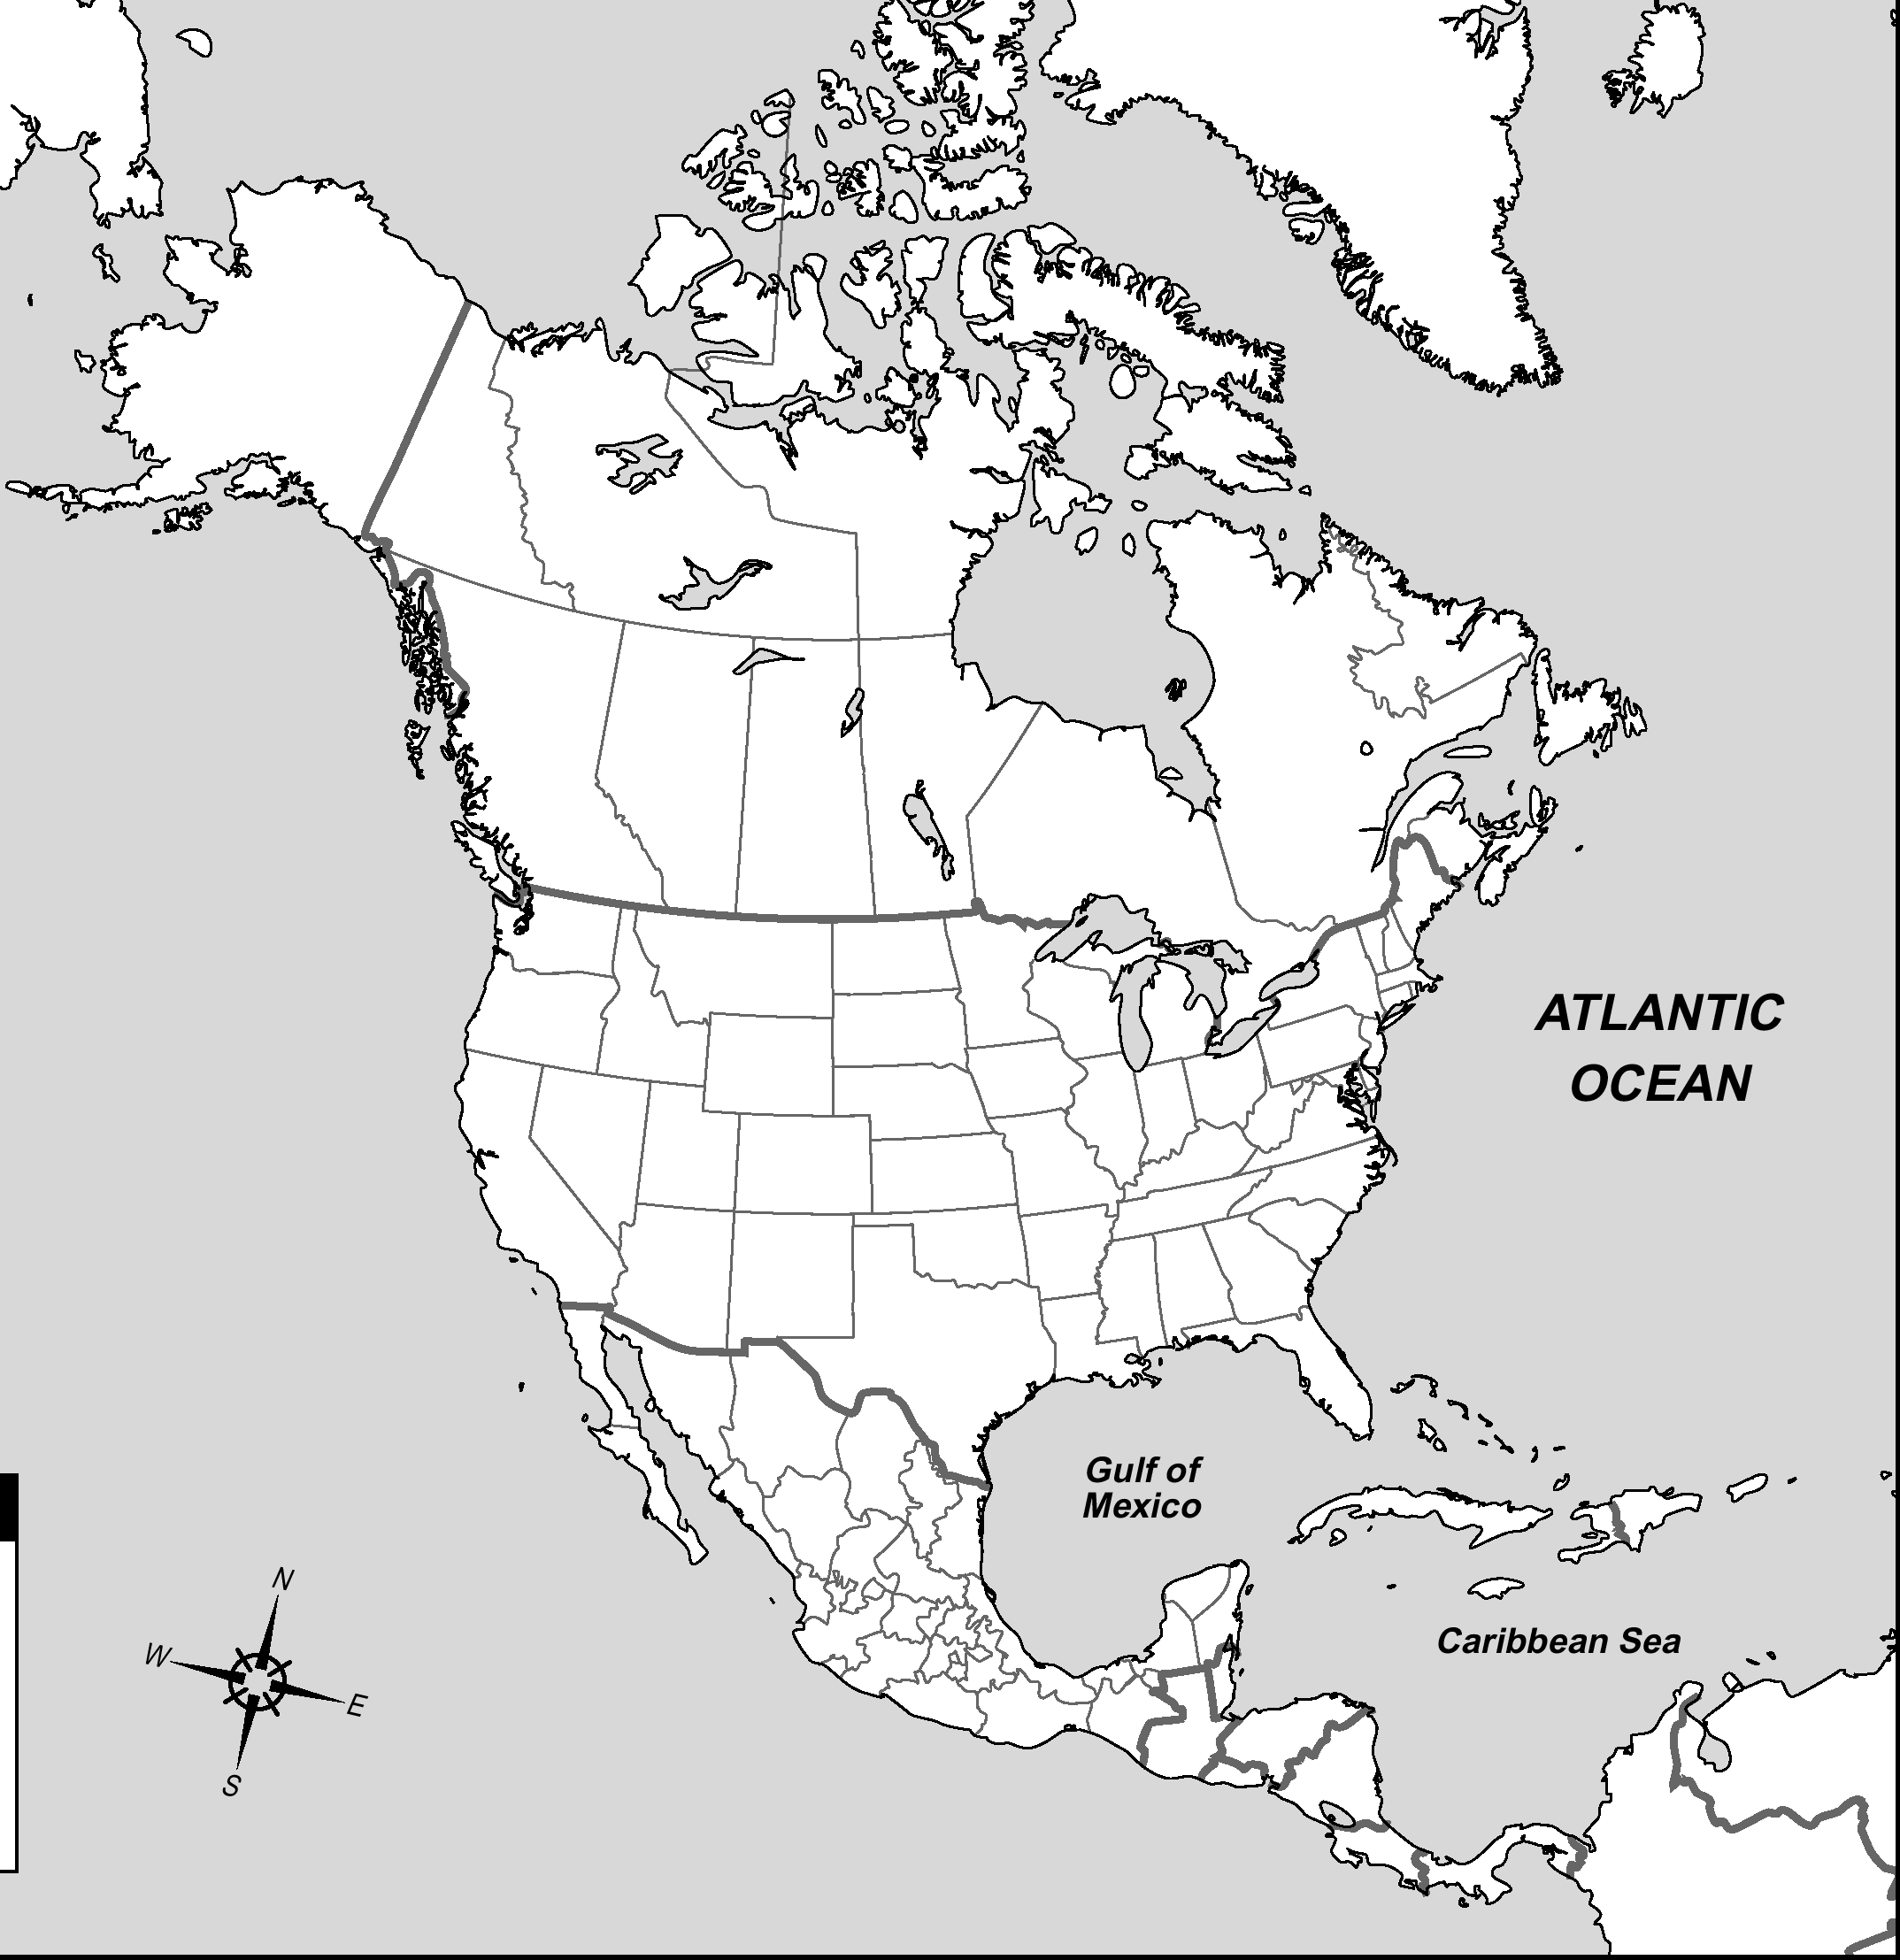 north america outline map North America Political Outline Map Full Size Gifex north america outline map